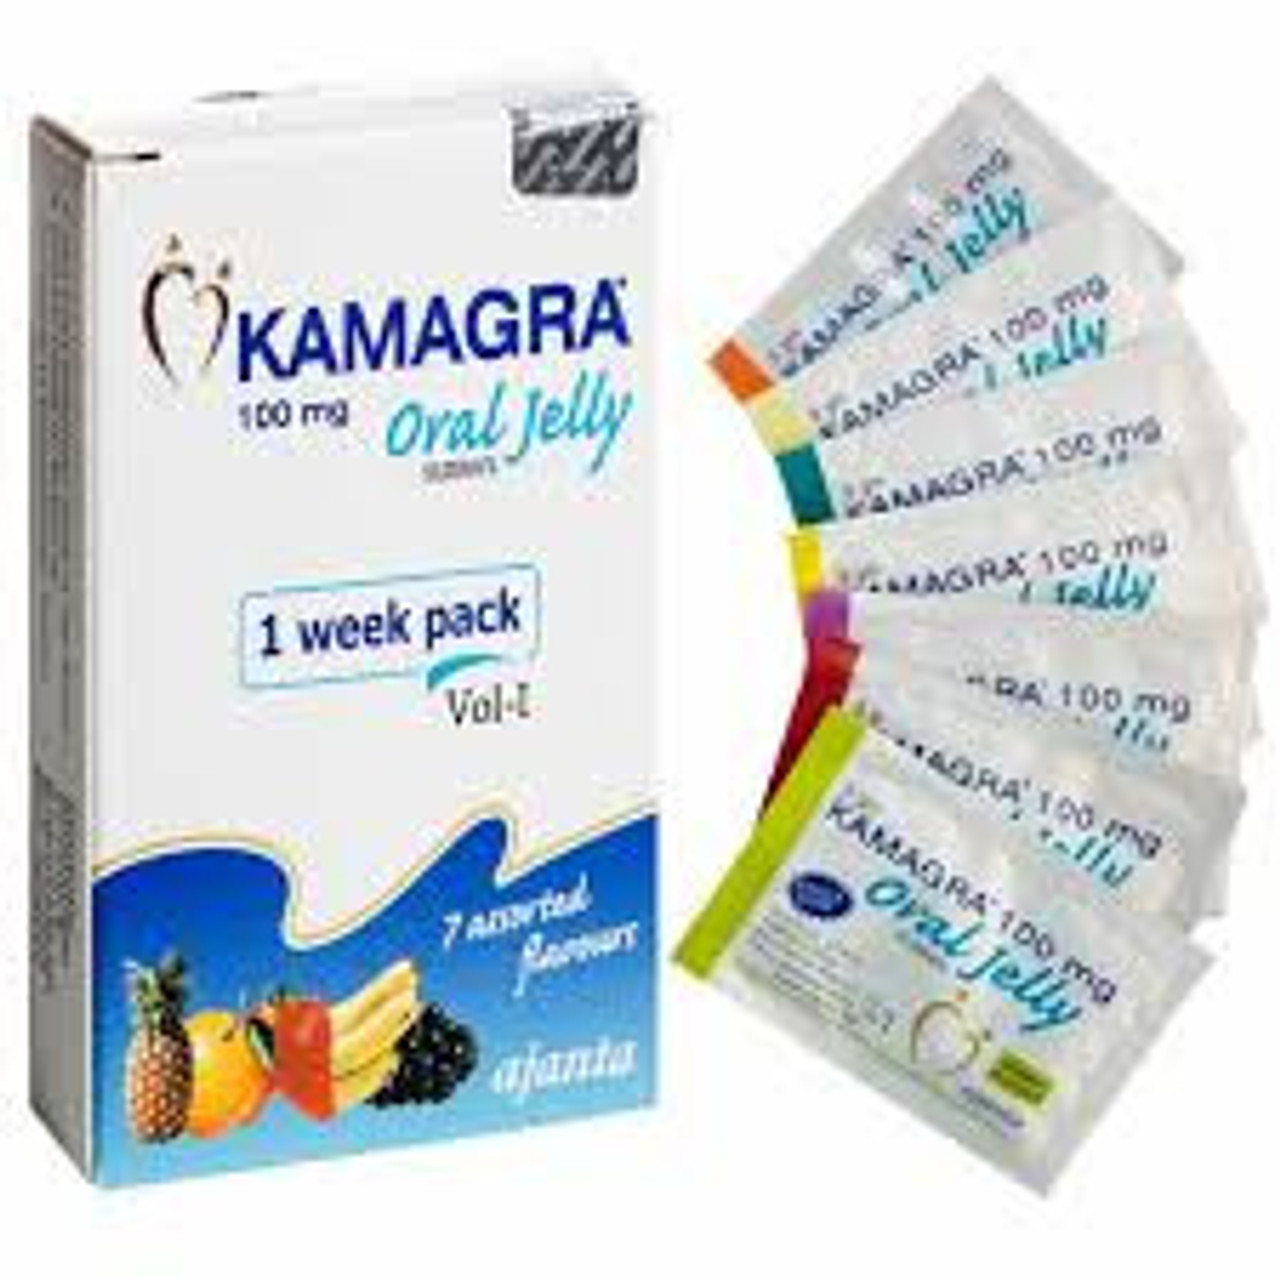 Buy Kamagra Oral Jelly Online - Best Options - Washington Home